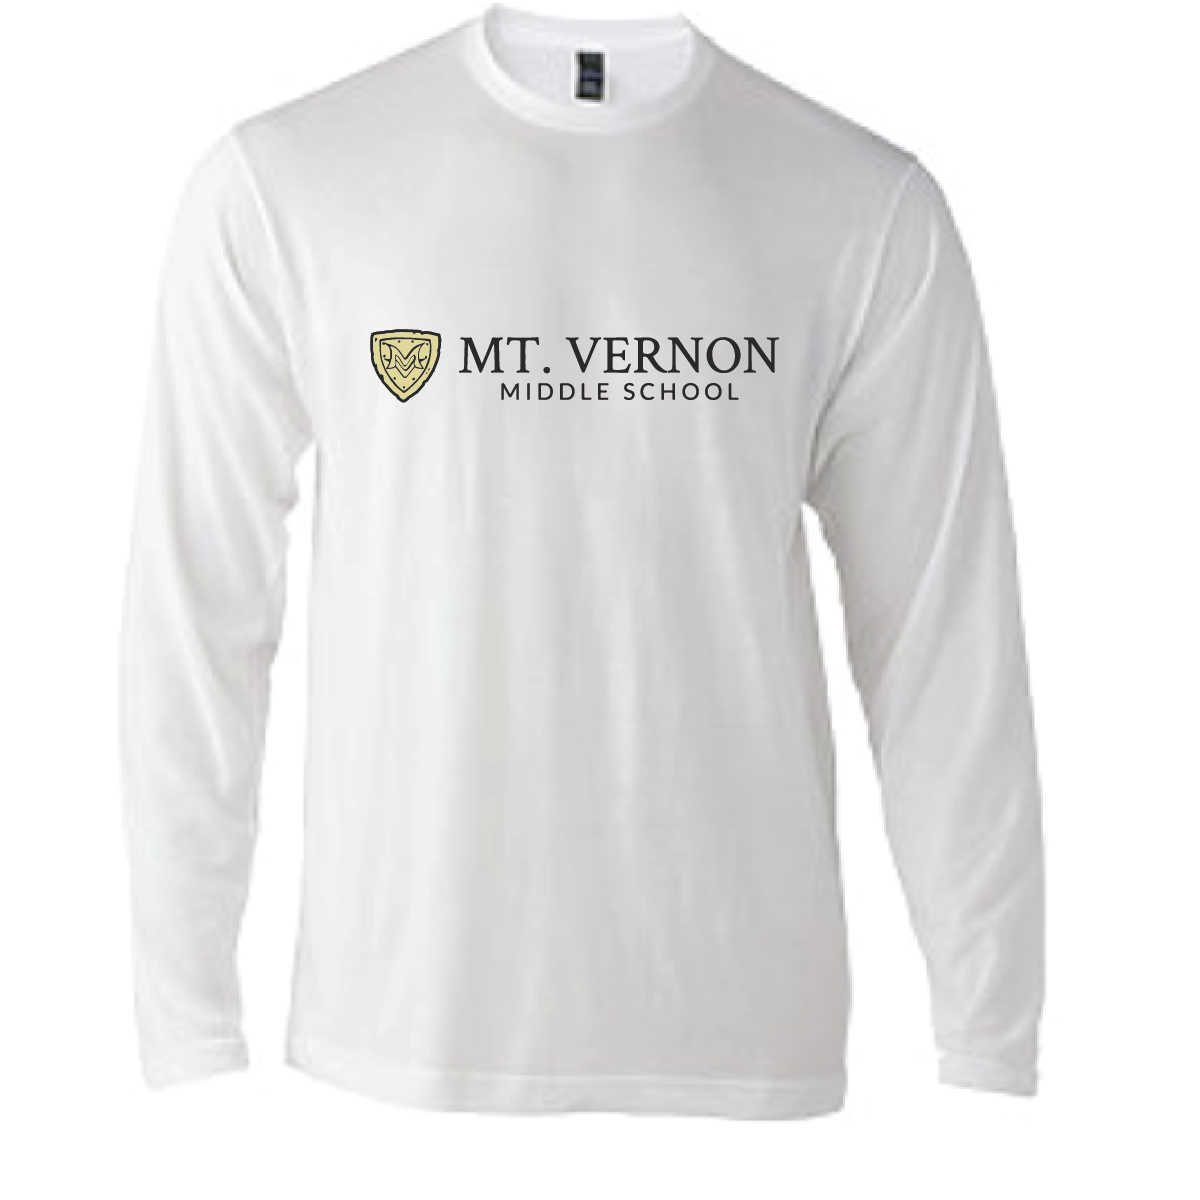 Softstyle Long Sleeve Tee / White / Mt. Vernon